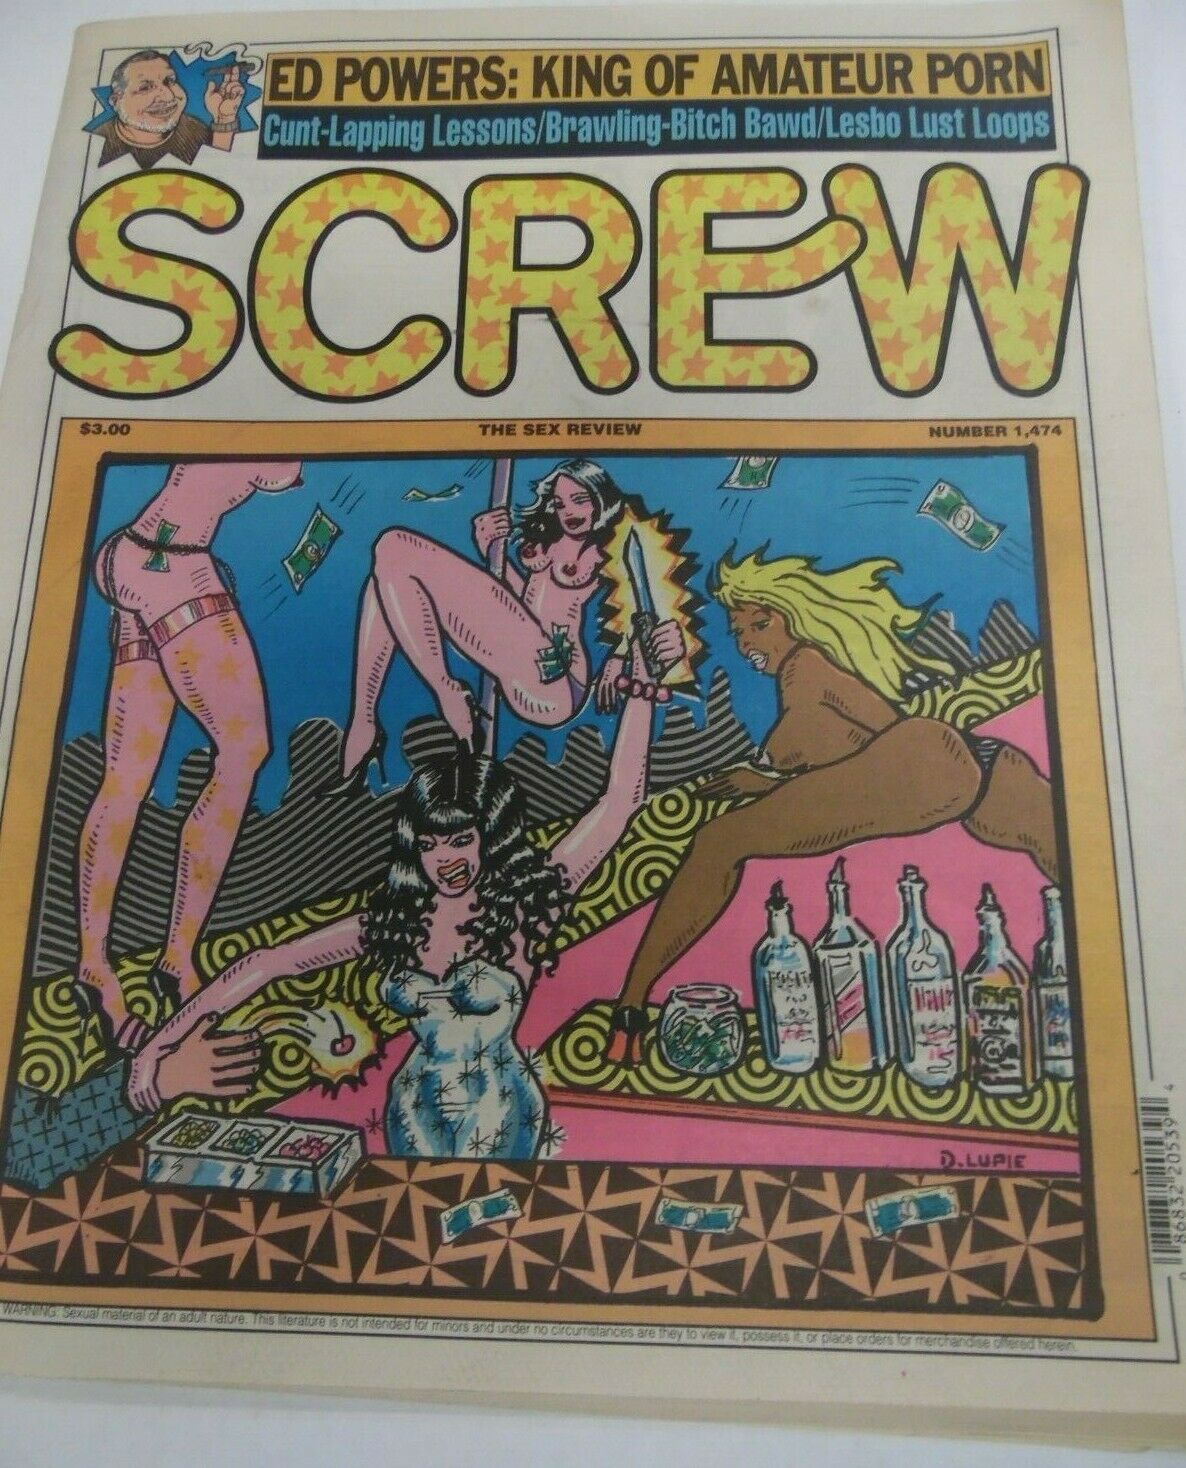 Screw Newspaper Ed Powers King Of Amateur Porn #1474 June 2 121419lm-e